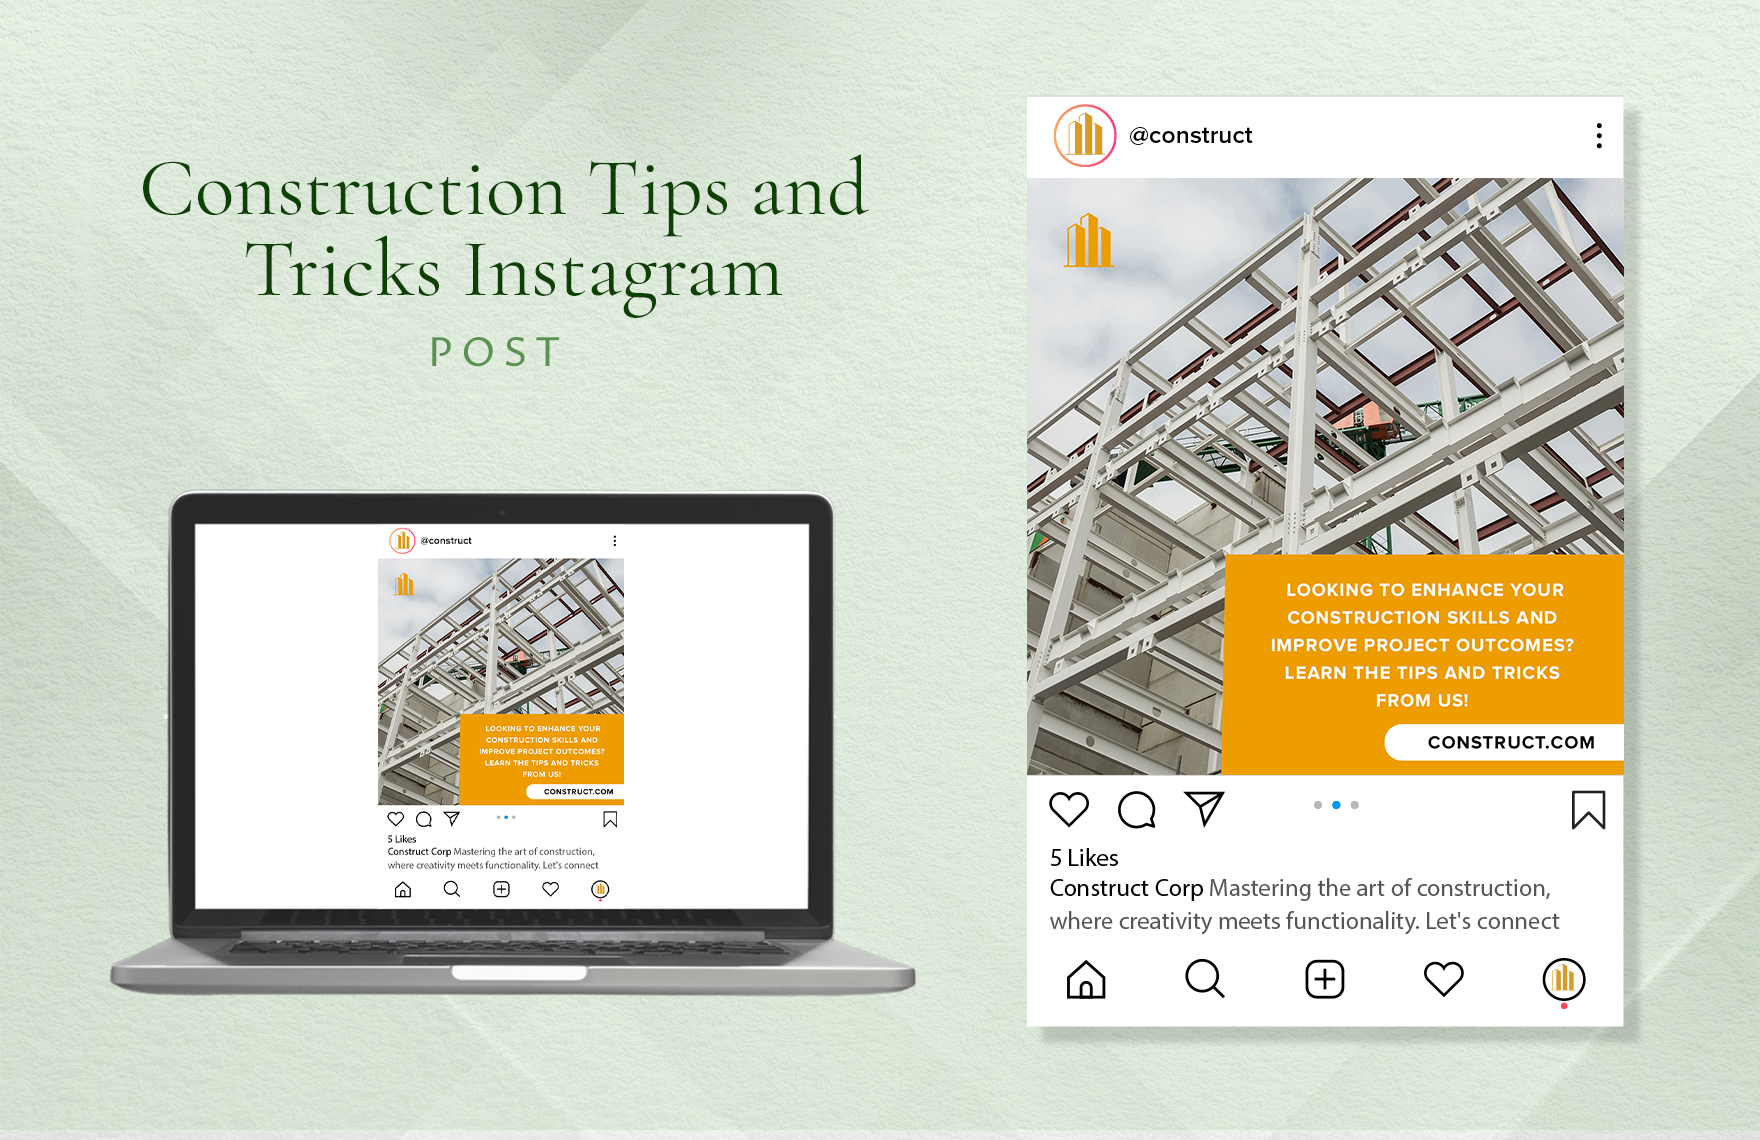 Construction Tips and Tricks Instagram Post